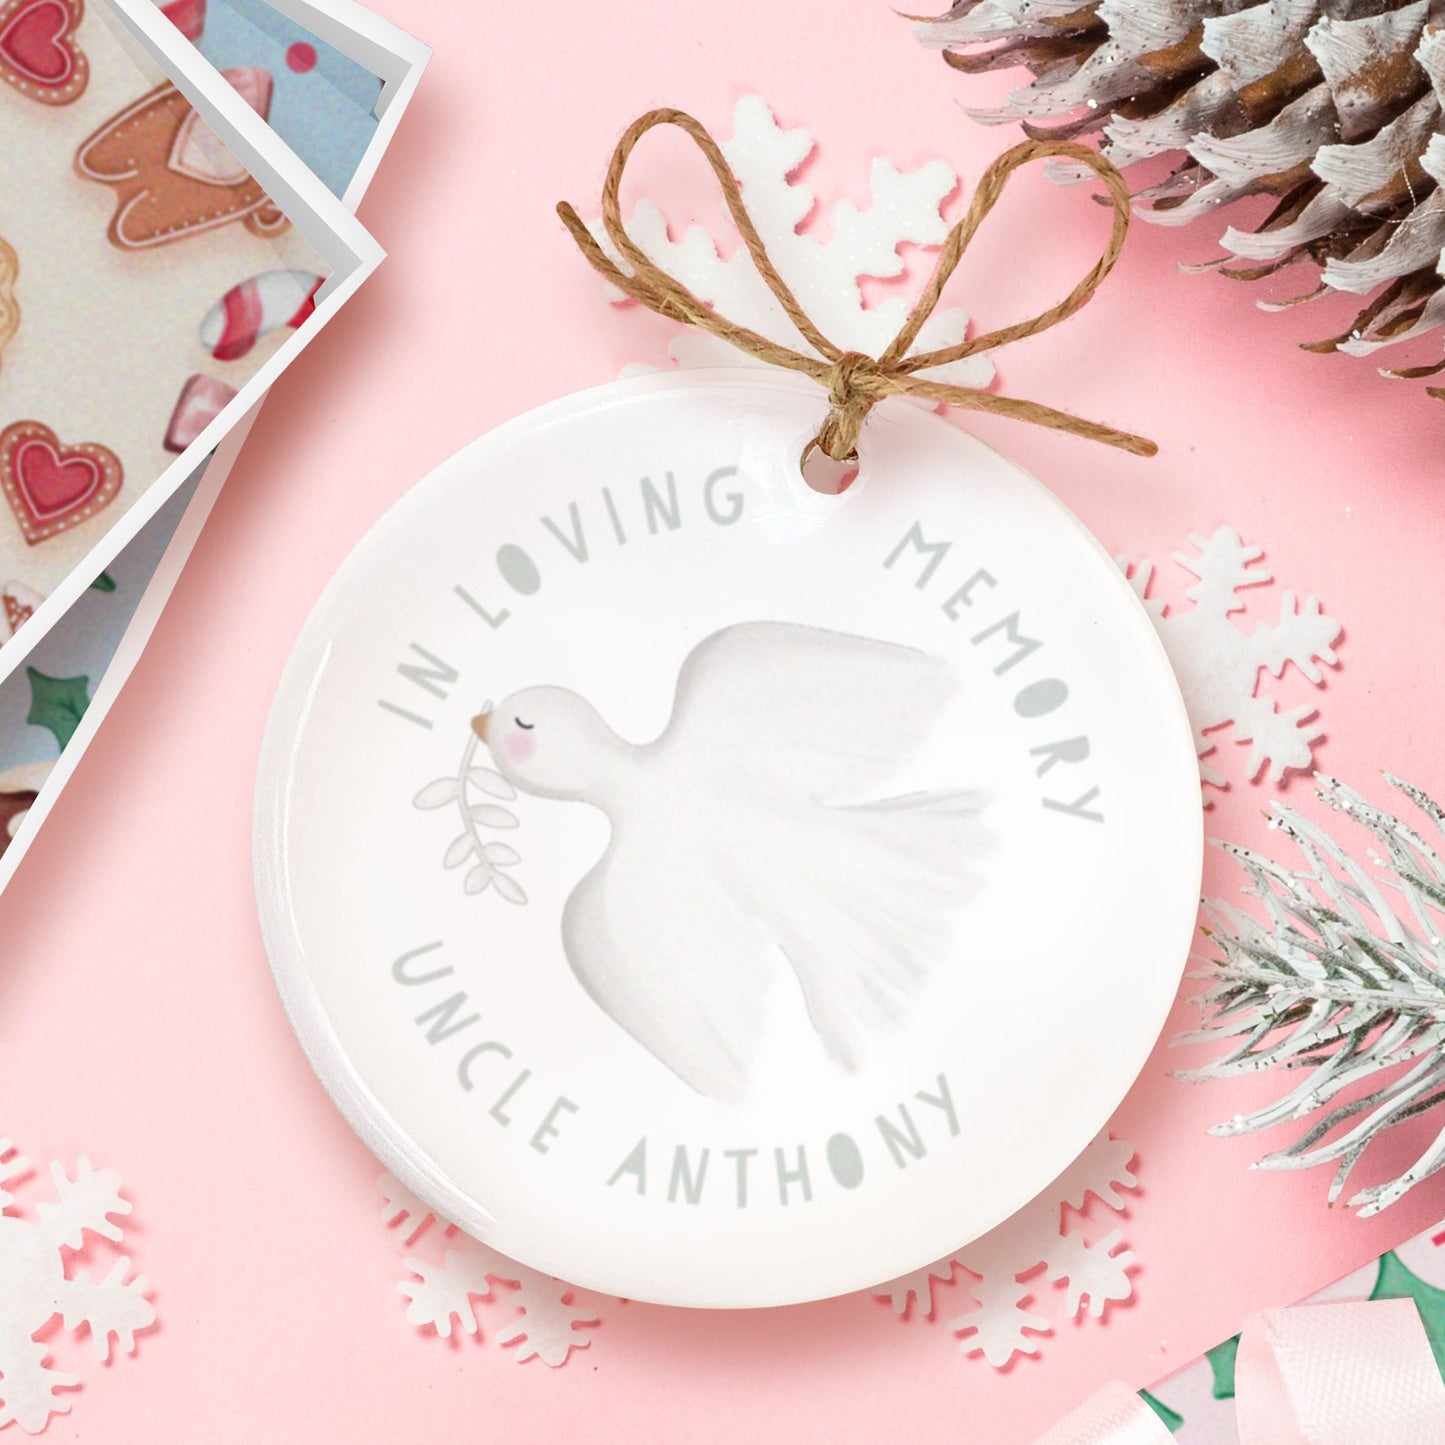 In Loving Memory Dove Ceramic Decoration. Remembrance Ornament. Personalised In Loving Memory. Personalised Tree Bauble